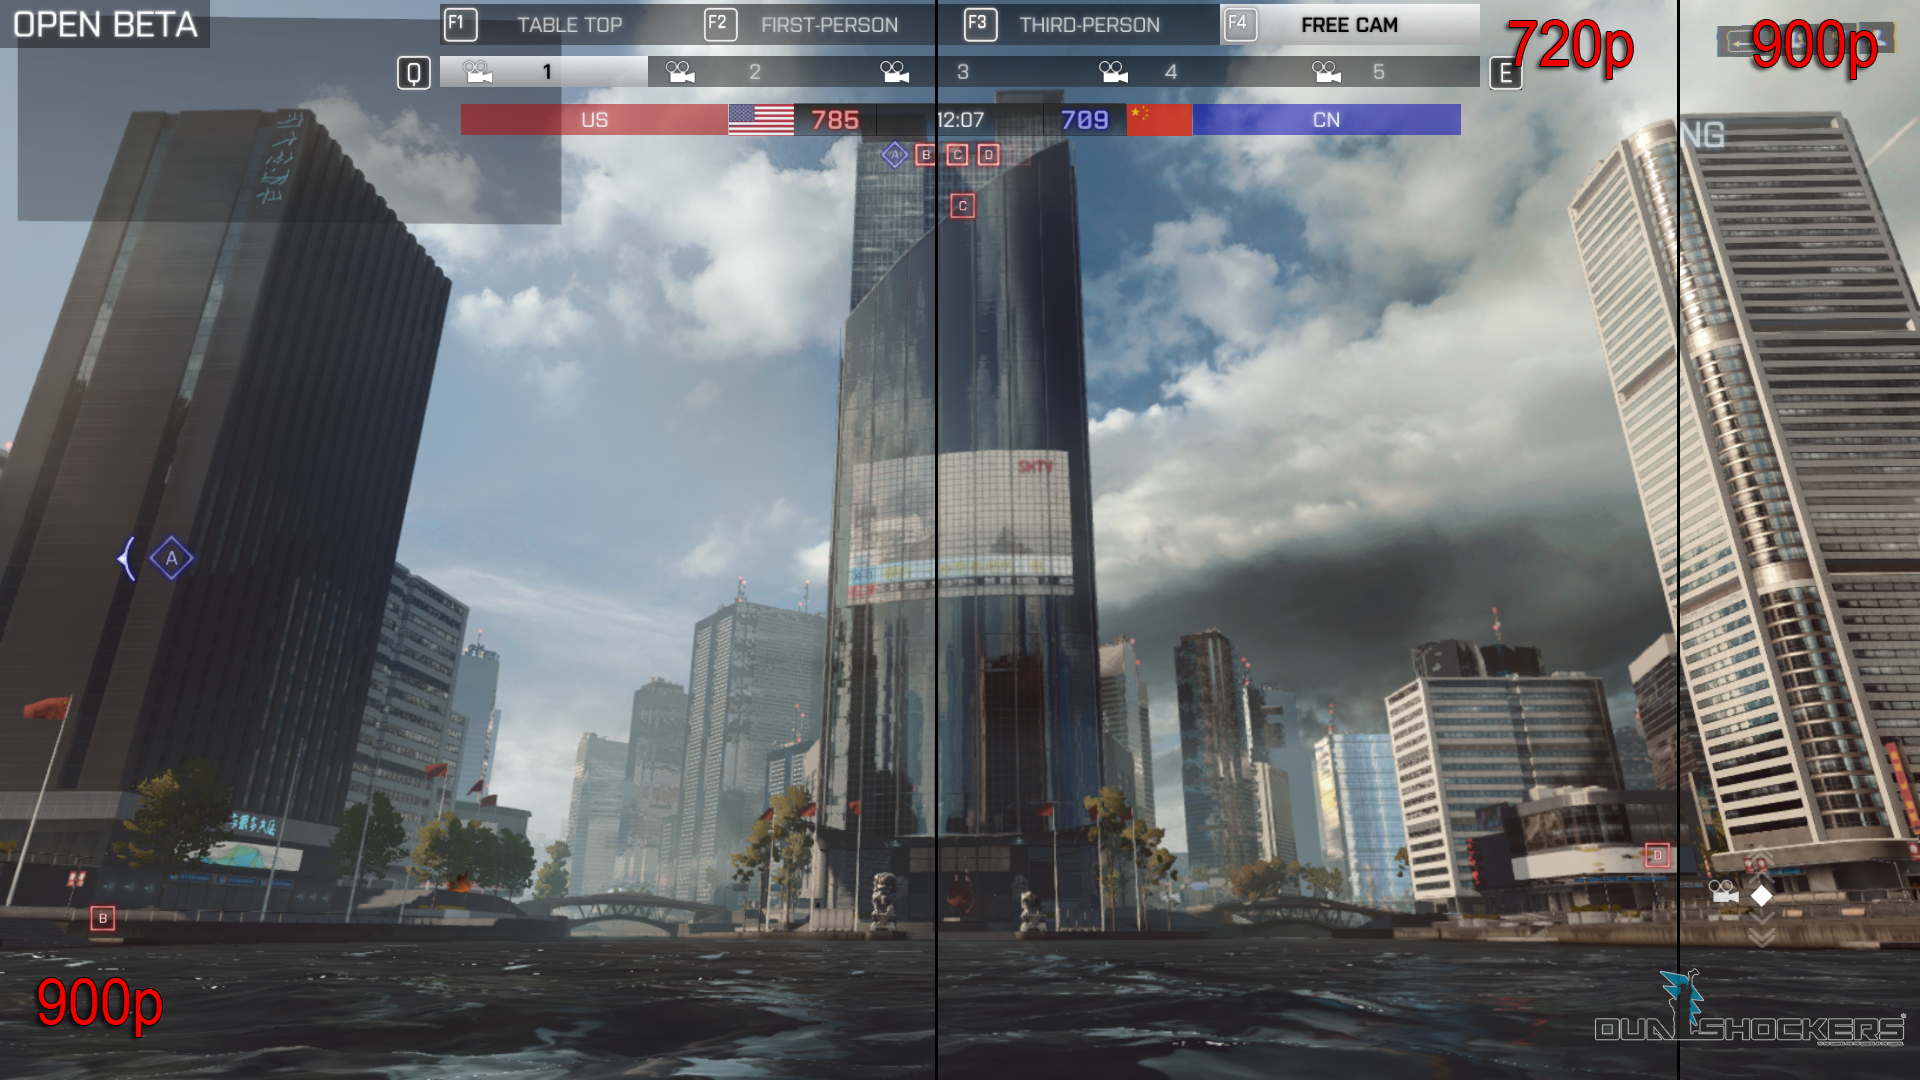 Call of Duty: Ghosts - Xbox One vs. PS4 Graphics Comparison